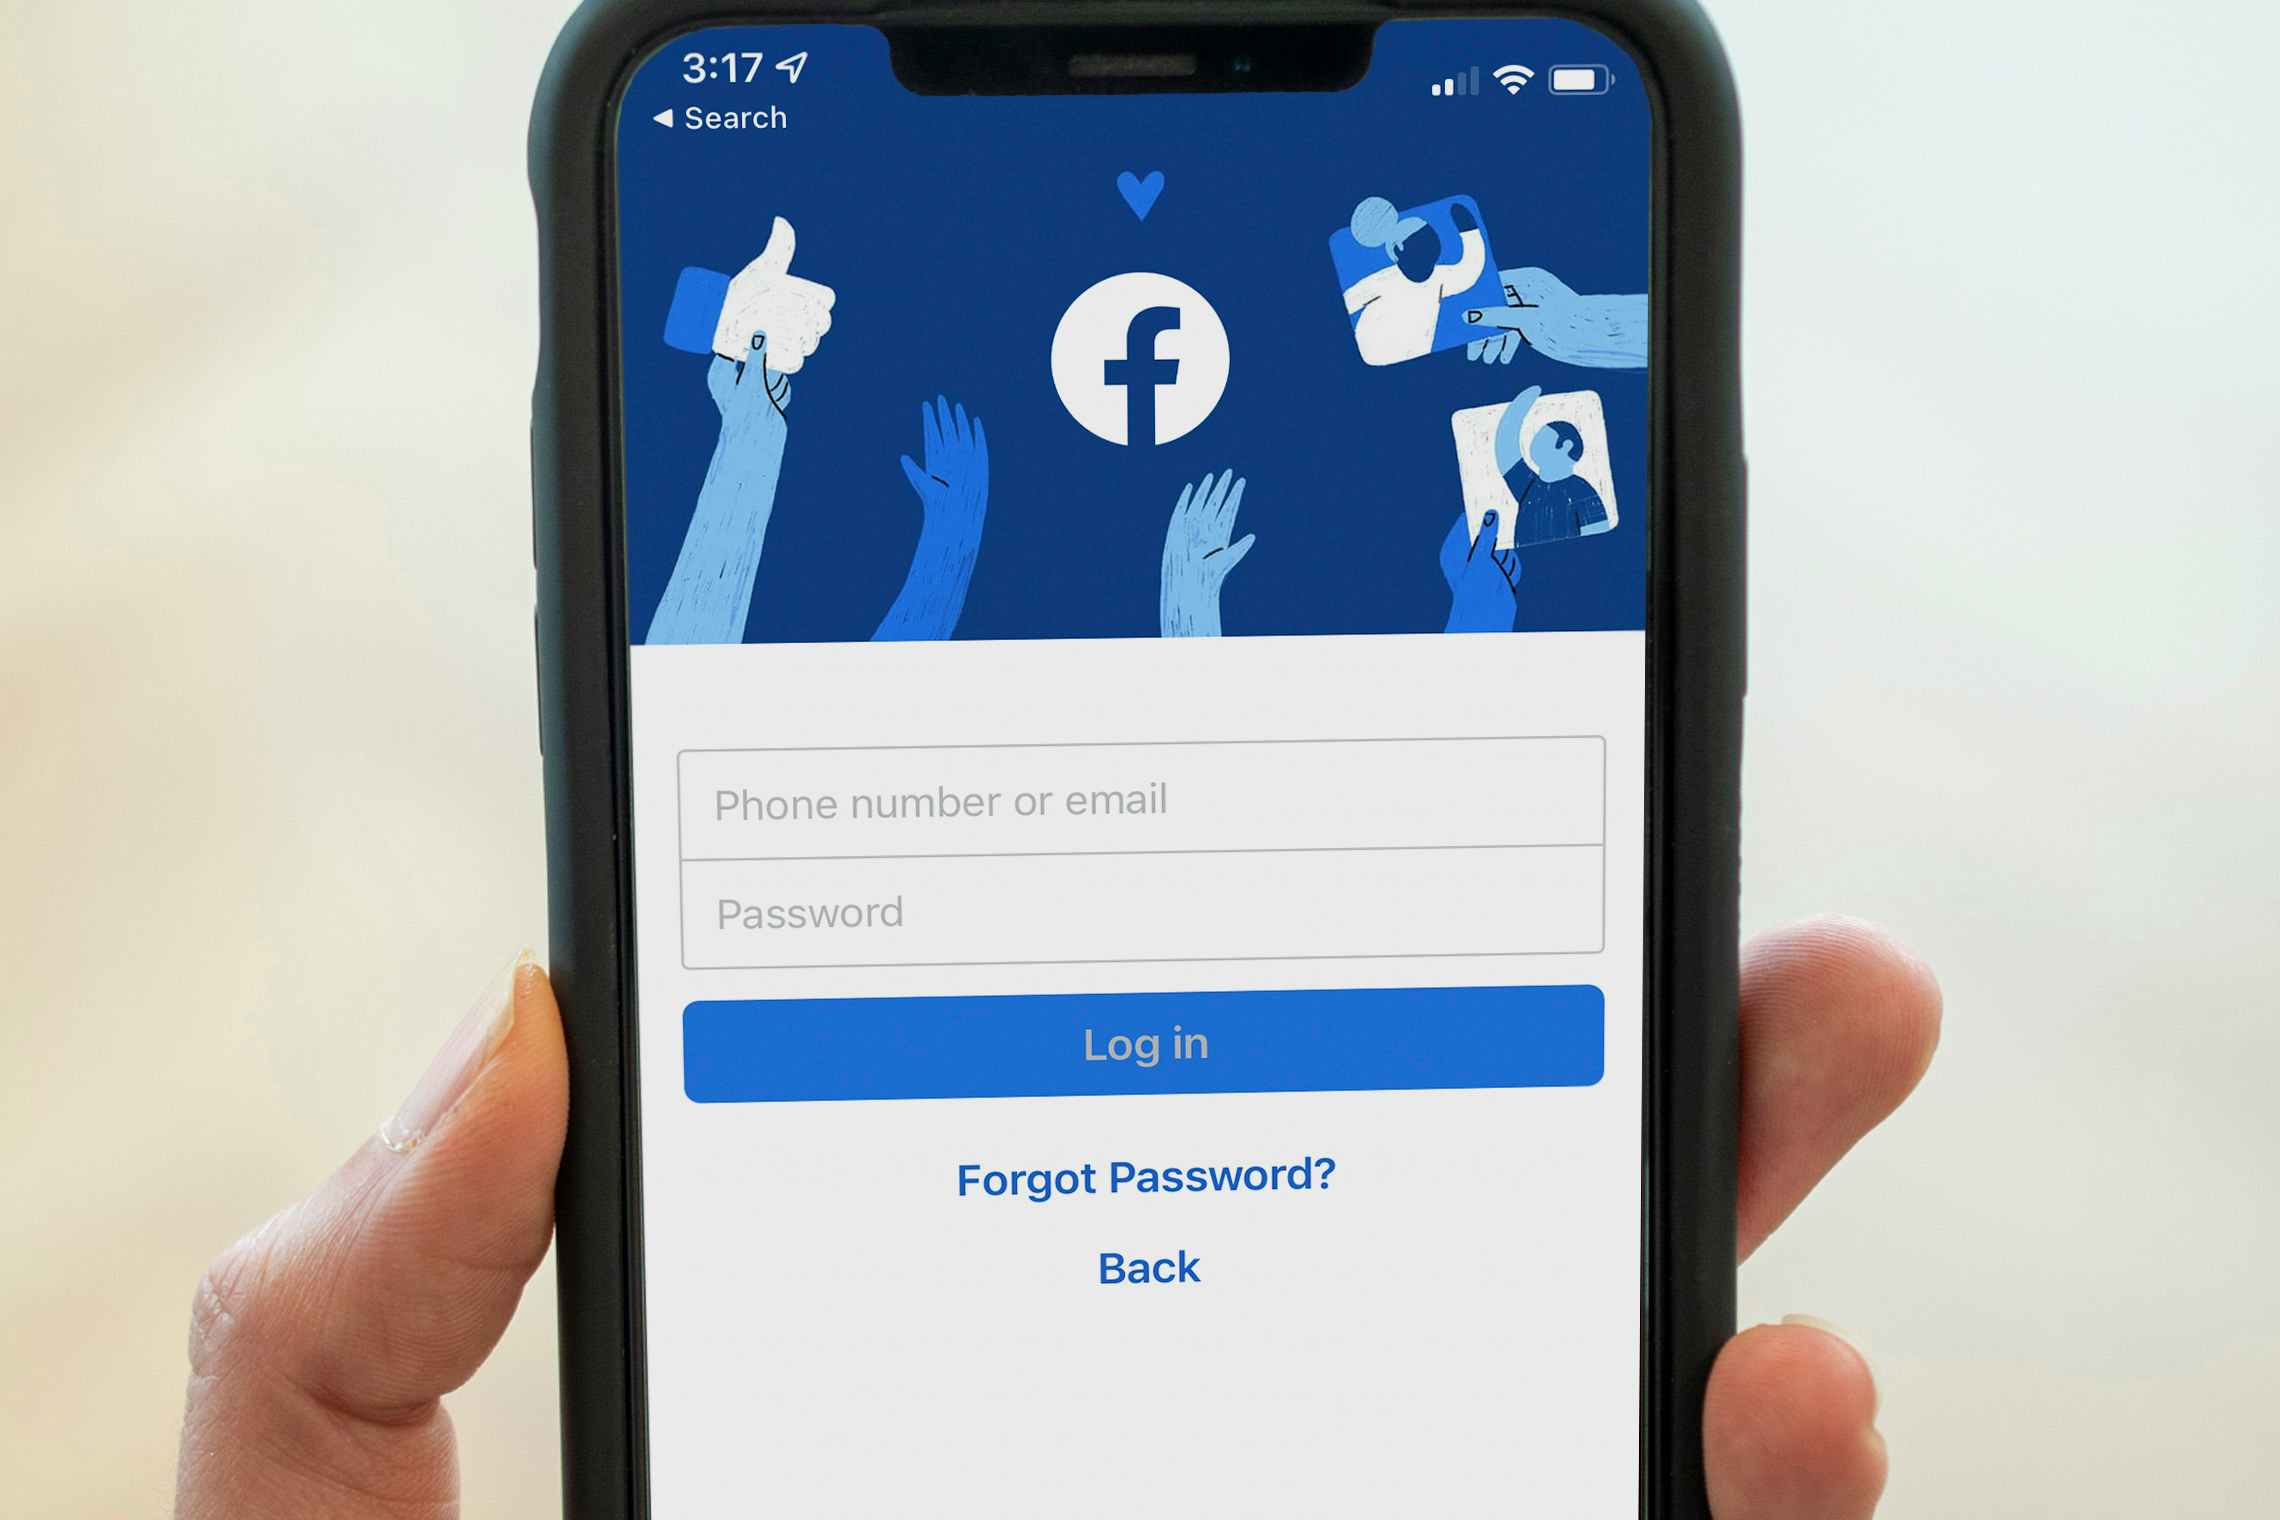 A close-up on an iPhone being held up, displaying the login page on the Facebook mobile app.